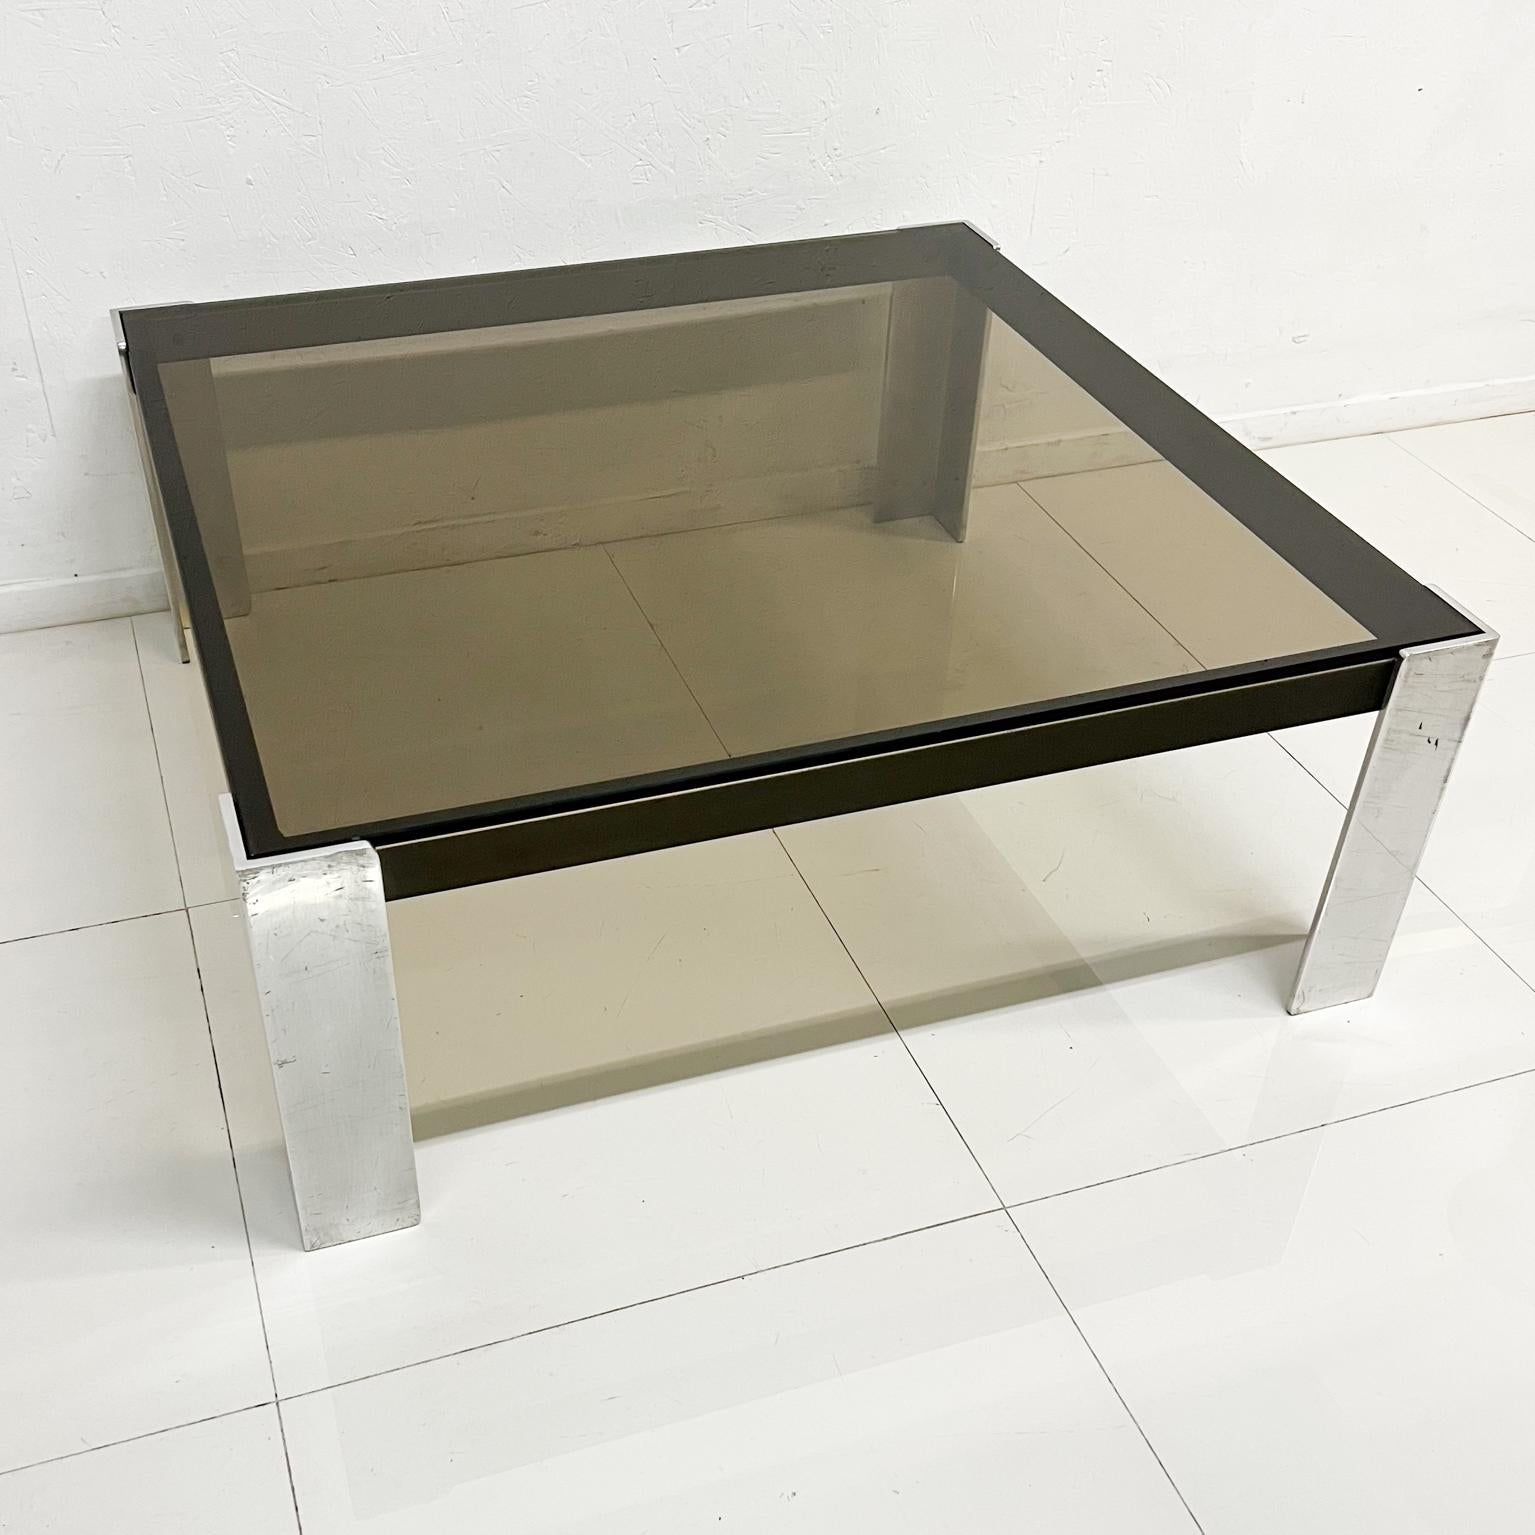 1970s Modernist Square Aluminum Coffee Table Style of Milo Baughman
Unmarked
15.5 tall x 39.88 x 39.88
Original unrestored vintage condition.
Delivery to LA OC Palm Springs
Please see images provided.
We have listed matching Console Table.
 